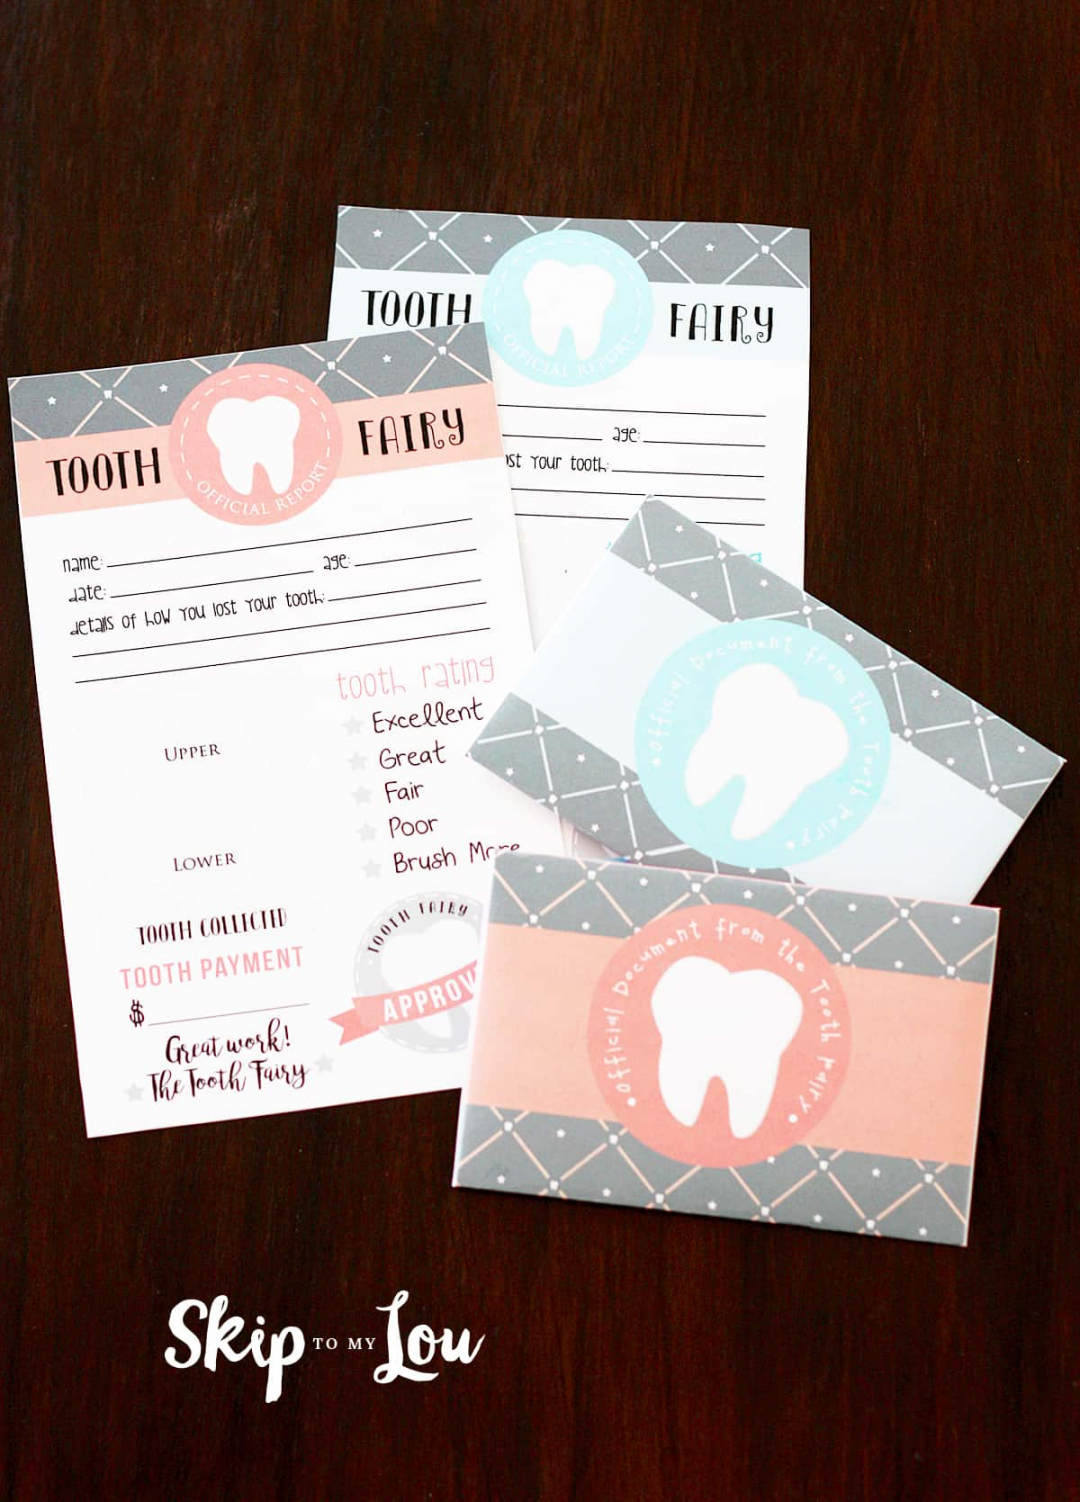 Free Printable Tooth Fairy Letter  Skip To My Lou - FREE Printables - Free Printable Tooth Fairy Letter And Envelope